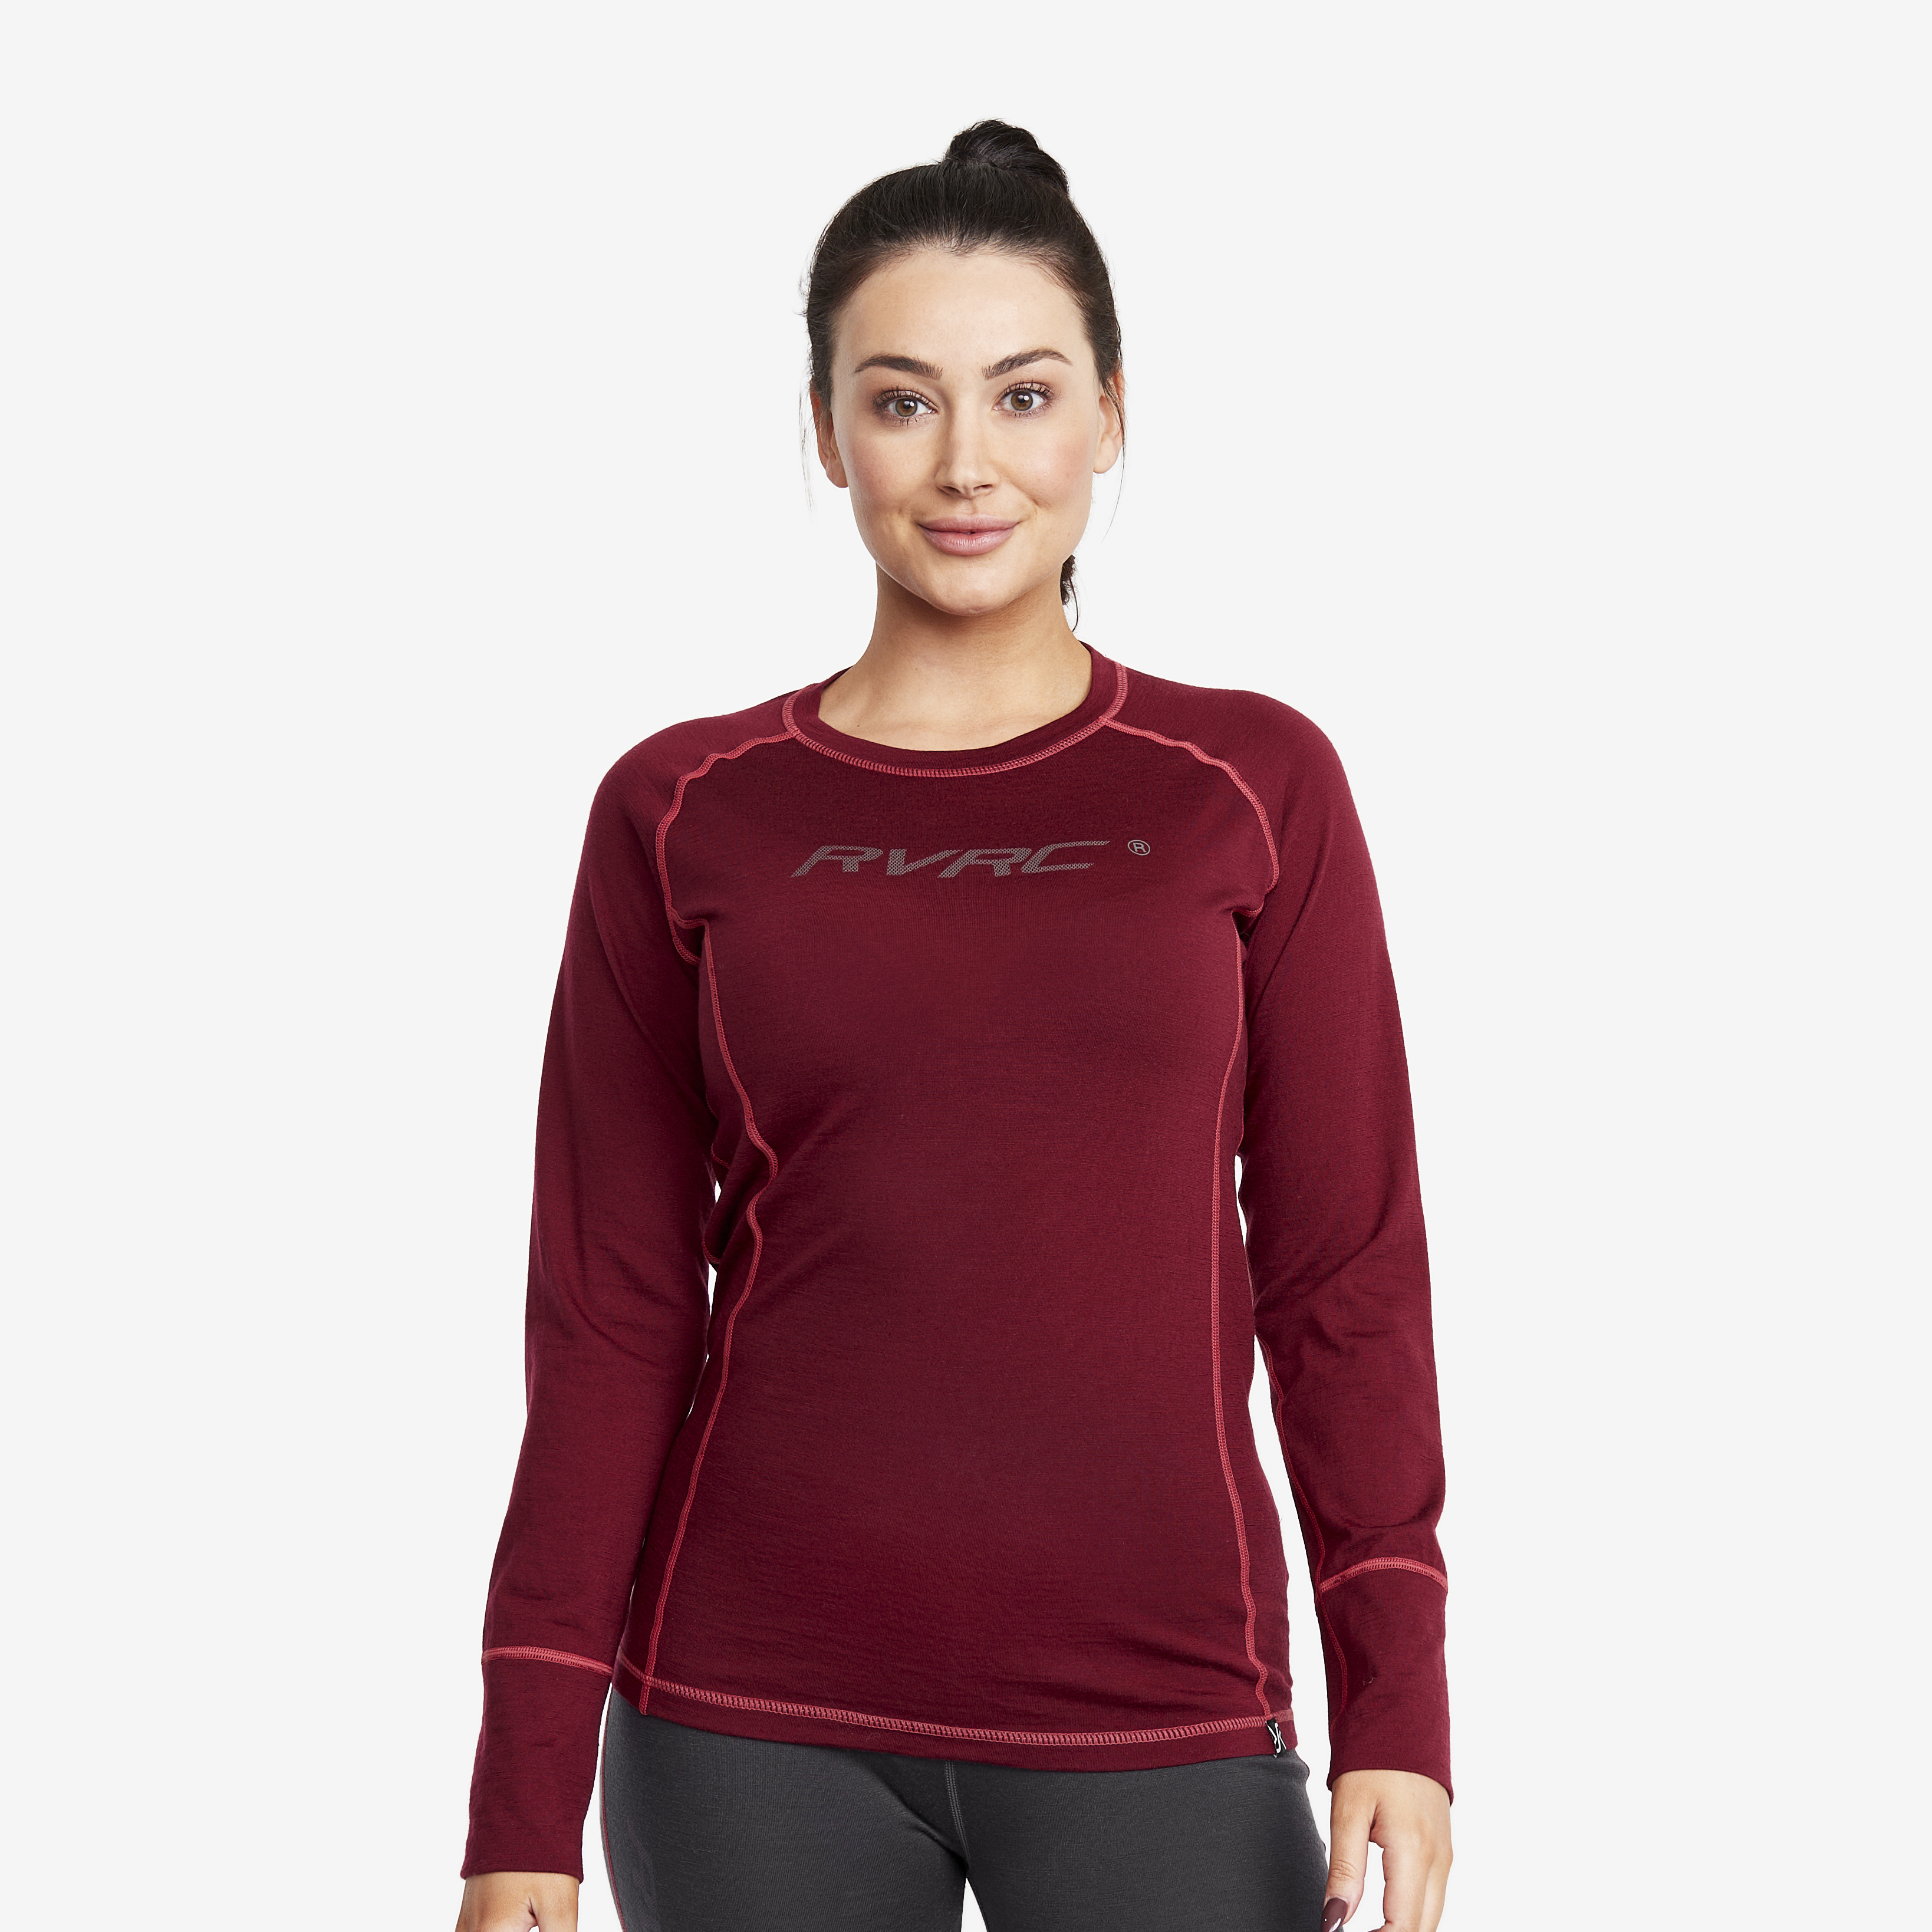 Outright Merino Top Bison Red/ Anthracite Damen